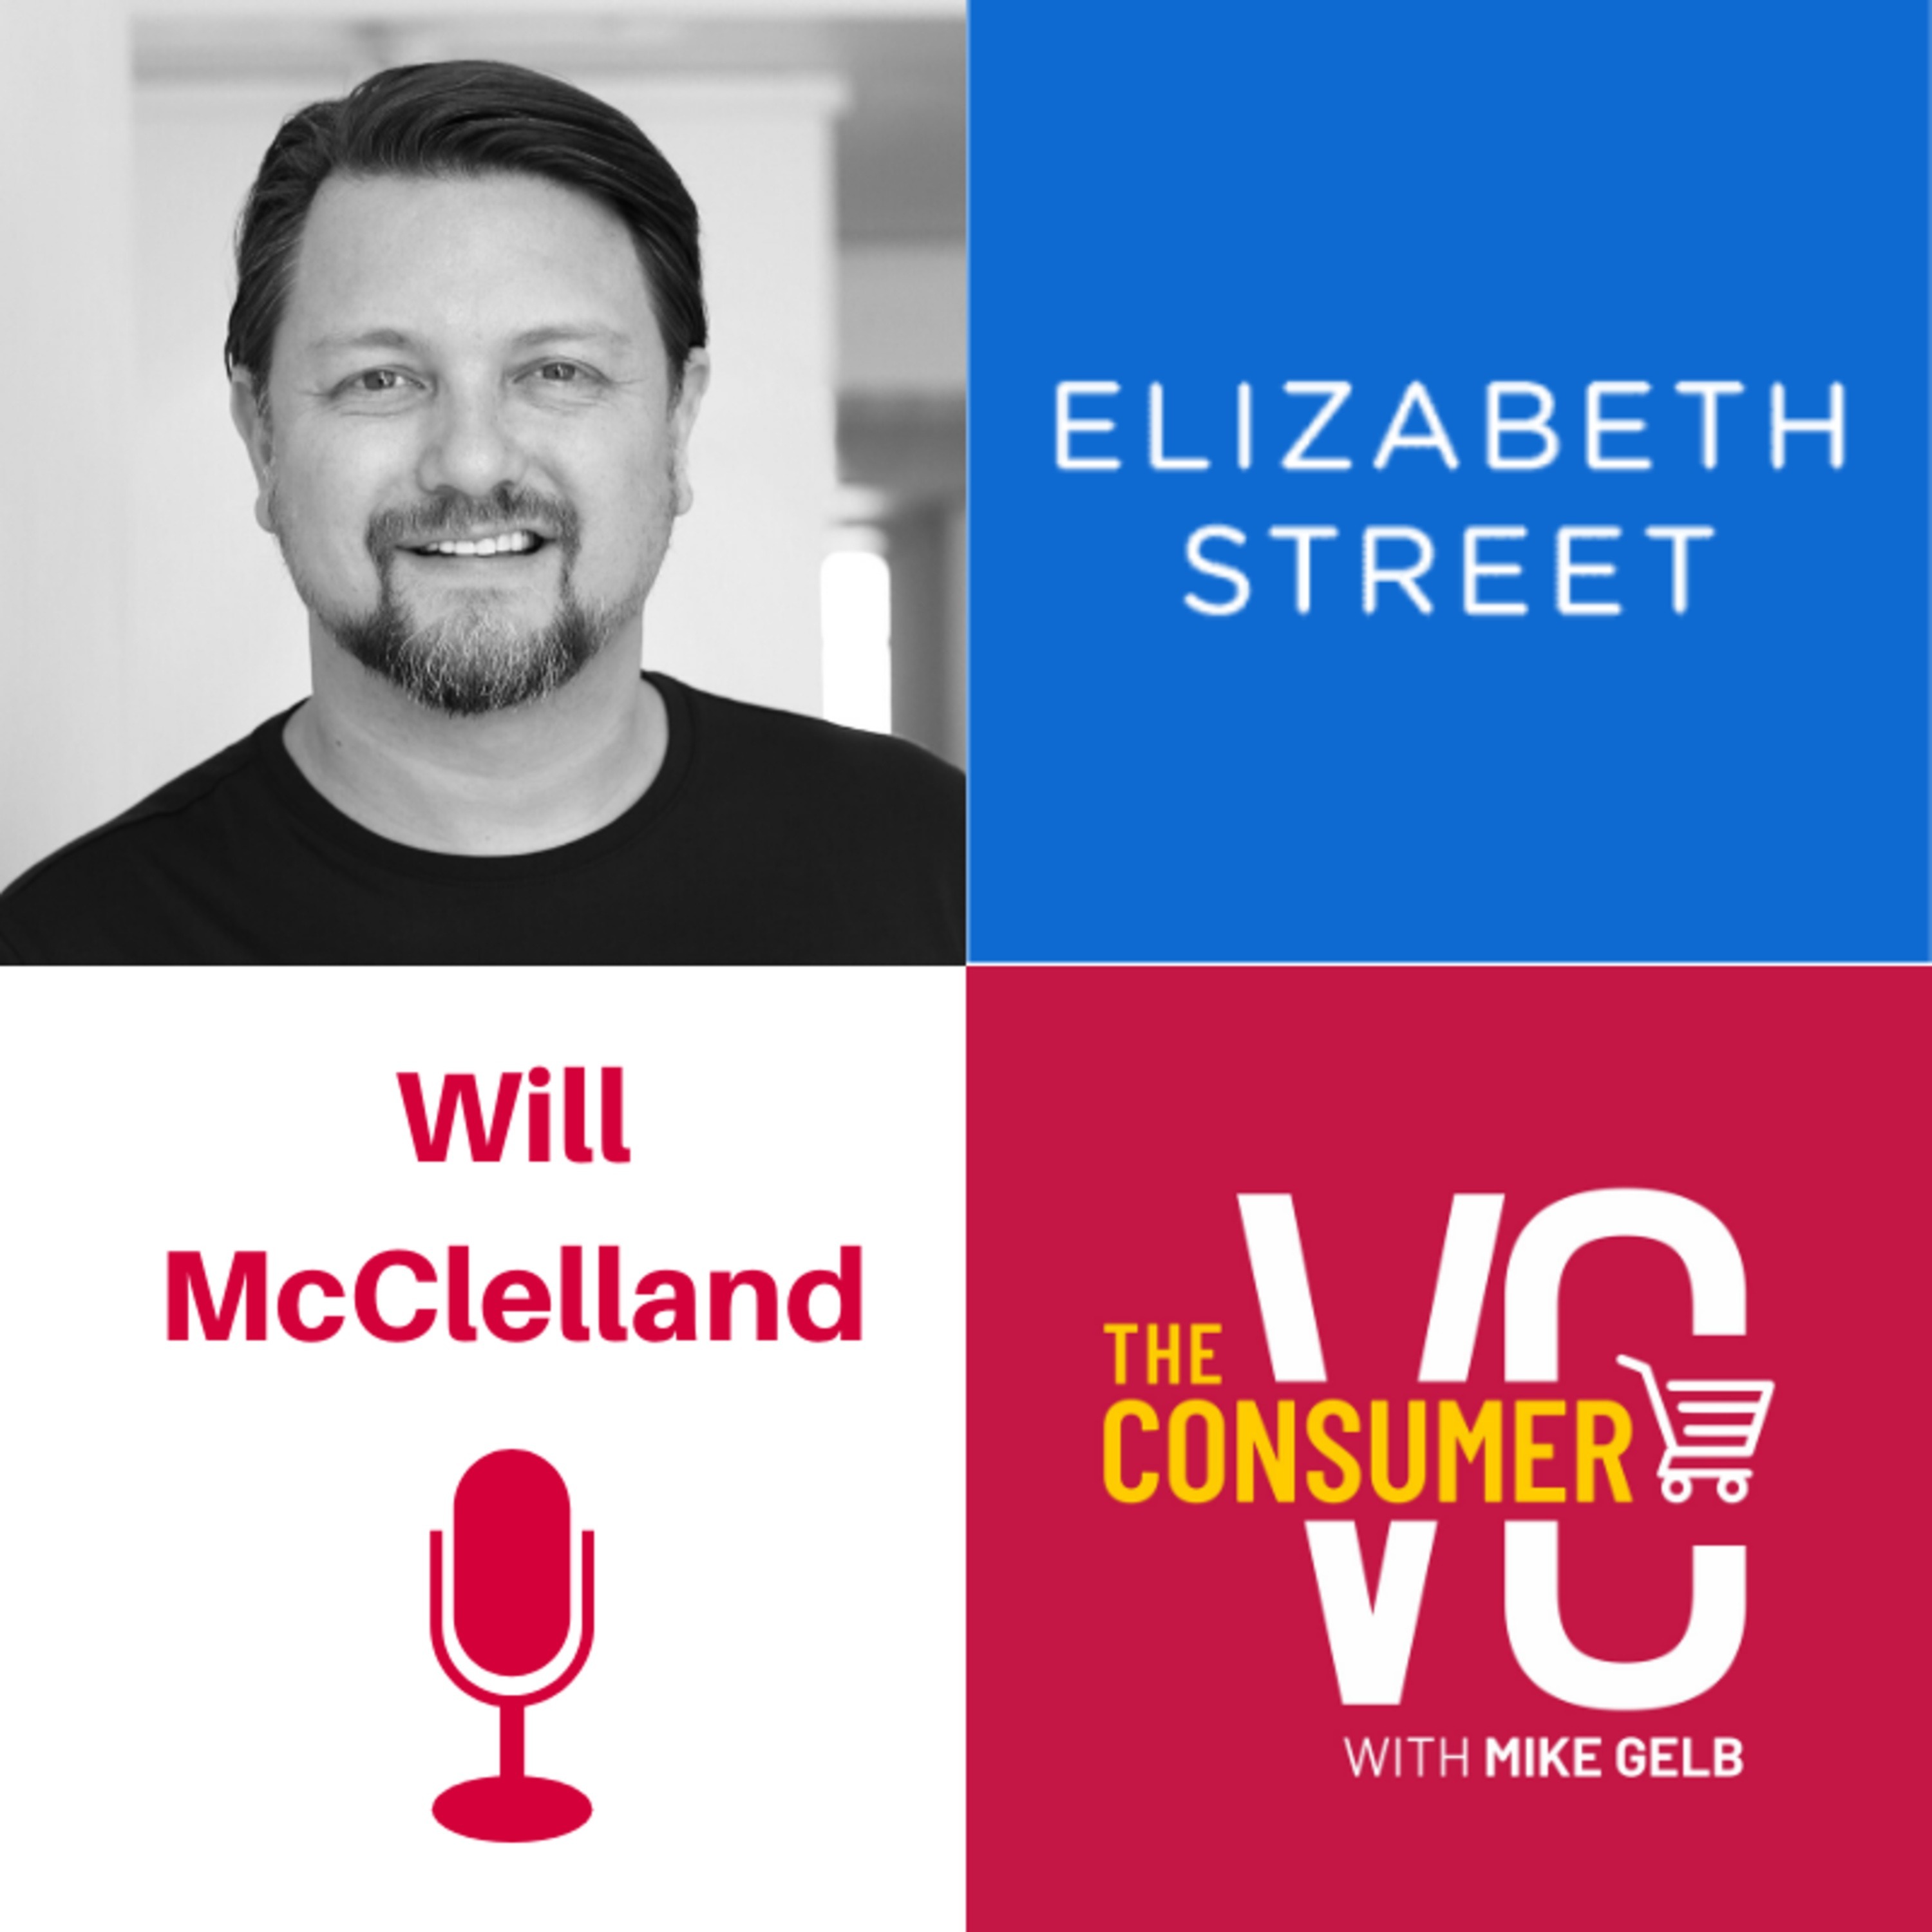 Will McClelland (Elizabeth Street) - The Changing of Retail on High Streets, How to Analyze Competitive Advantages, ROI on Consumer Companies